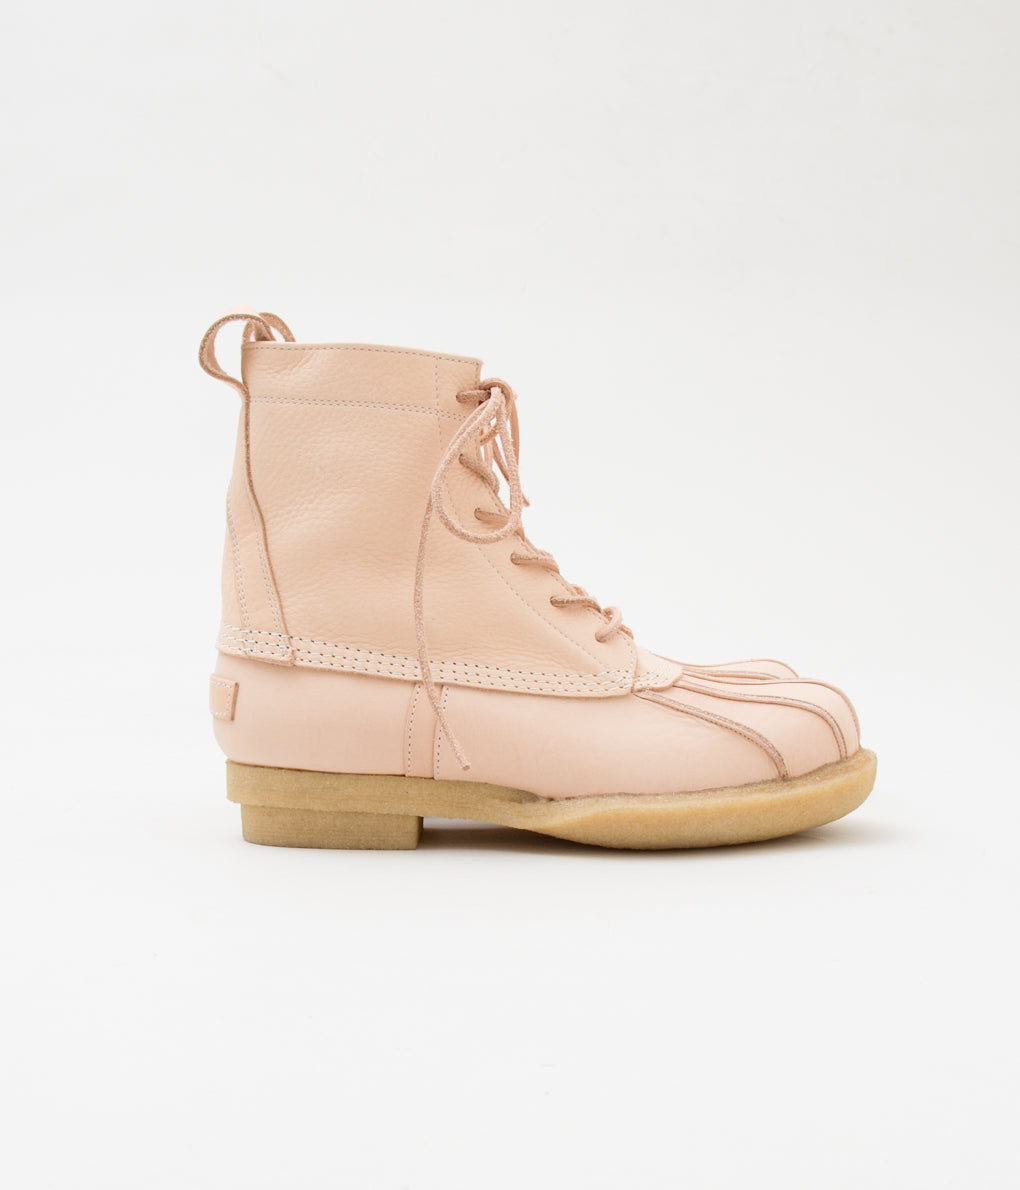 HENDER SCHEME "manual industrial products 26"(NATURAL)